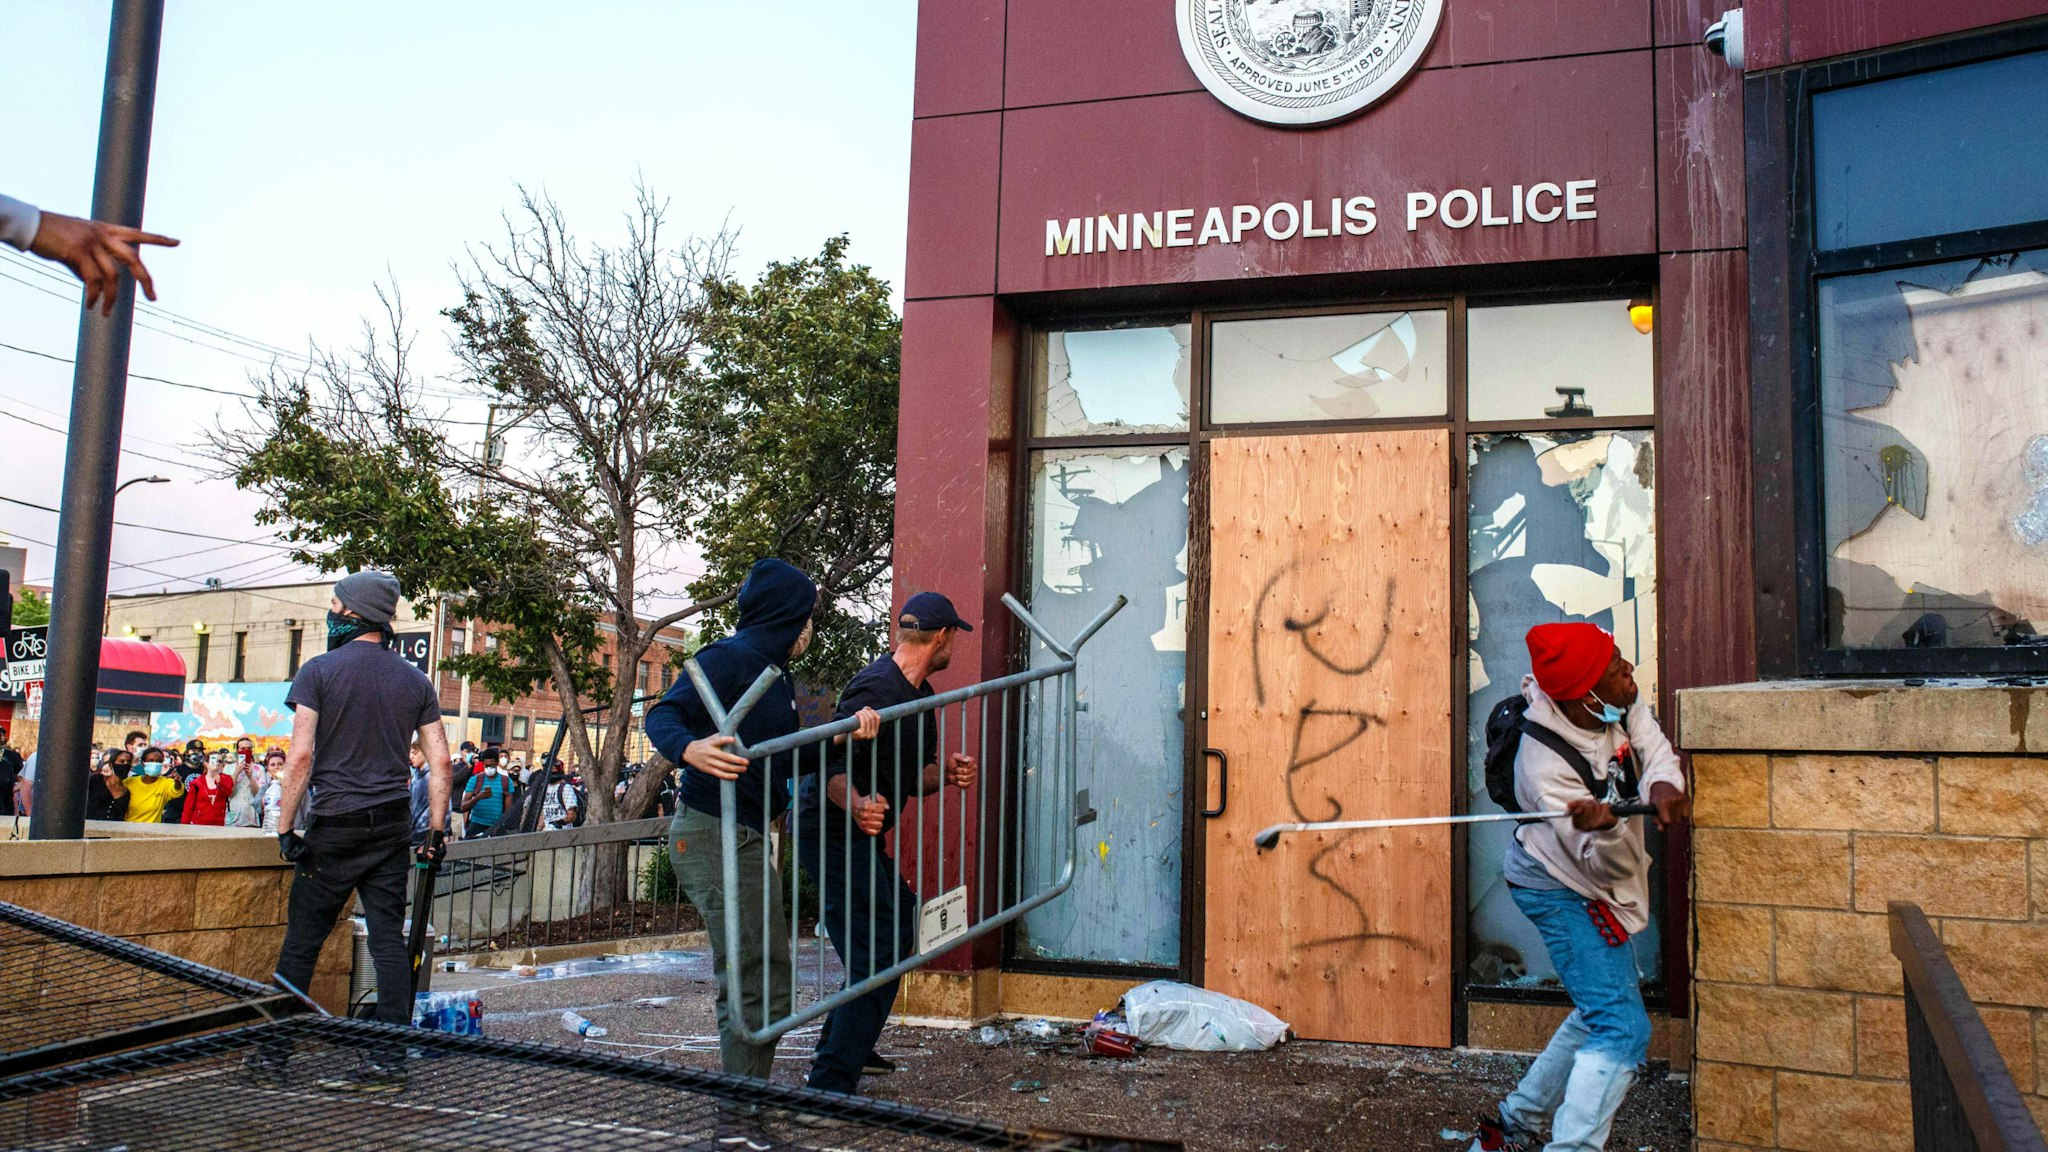 Protesters use a barricade to try and break the windows of the Third Police Precinct on May 28, 2020 in Minneapolis, Minnesota, during a protest over the death of George Floyd, an unarmed black man, died after a police officer kneeled on his neck for several minutes. - Authorities in Minneapolis and its sister city St. Paul got reinforcements from the National Guard on May 28 as they girded for fresh protests and violence over the shocking police killing of a handcuffed black man. Three days after a policeman was filmed holding his knee to George Floyd's neck for more than five minutes until he went limp, outrage continued to spread over the latest example of police mistreatment of African Americans.